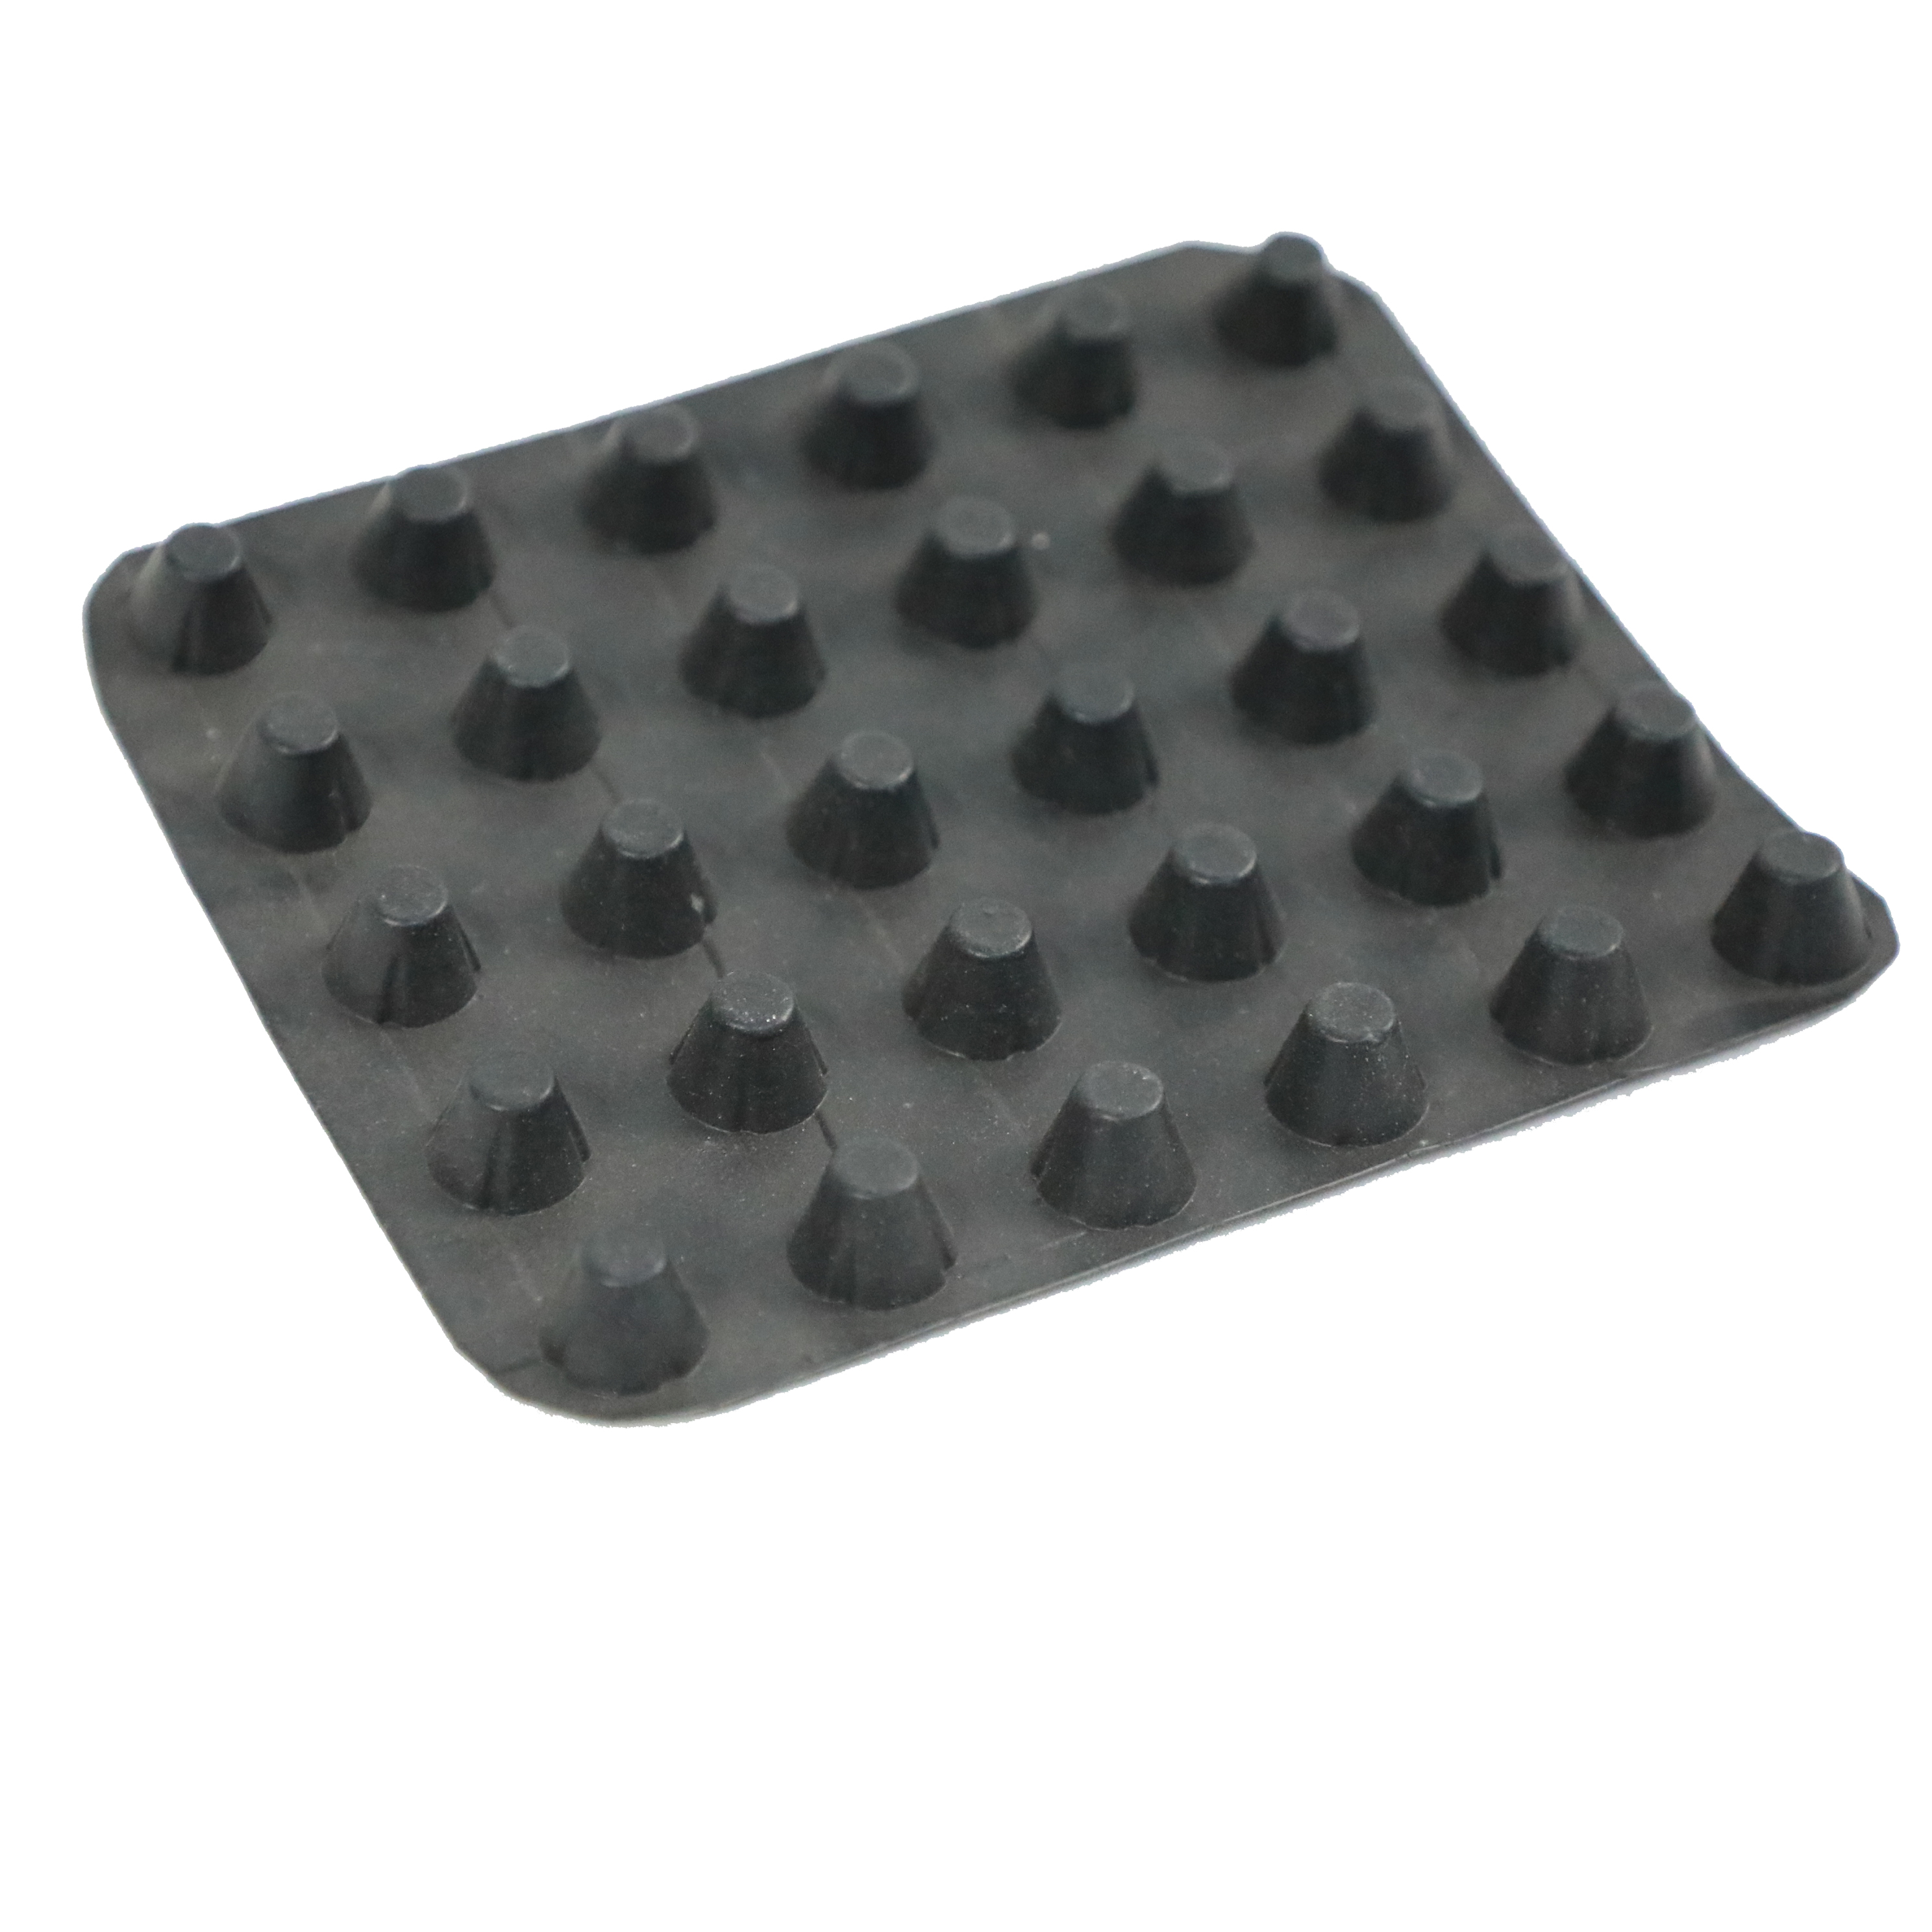 HDPE plastic drainage board for basement waterproofing